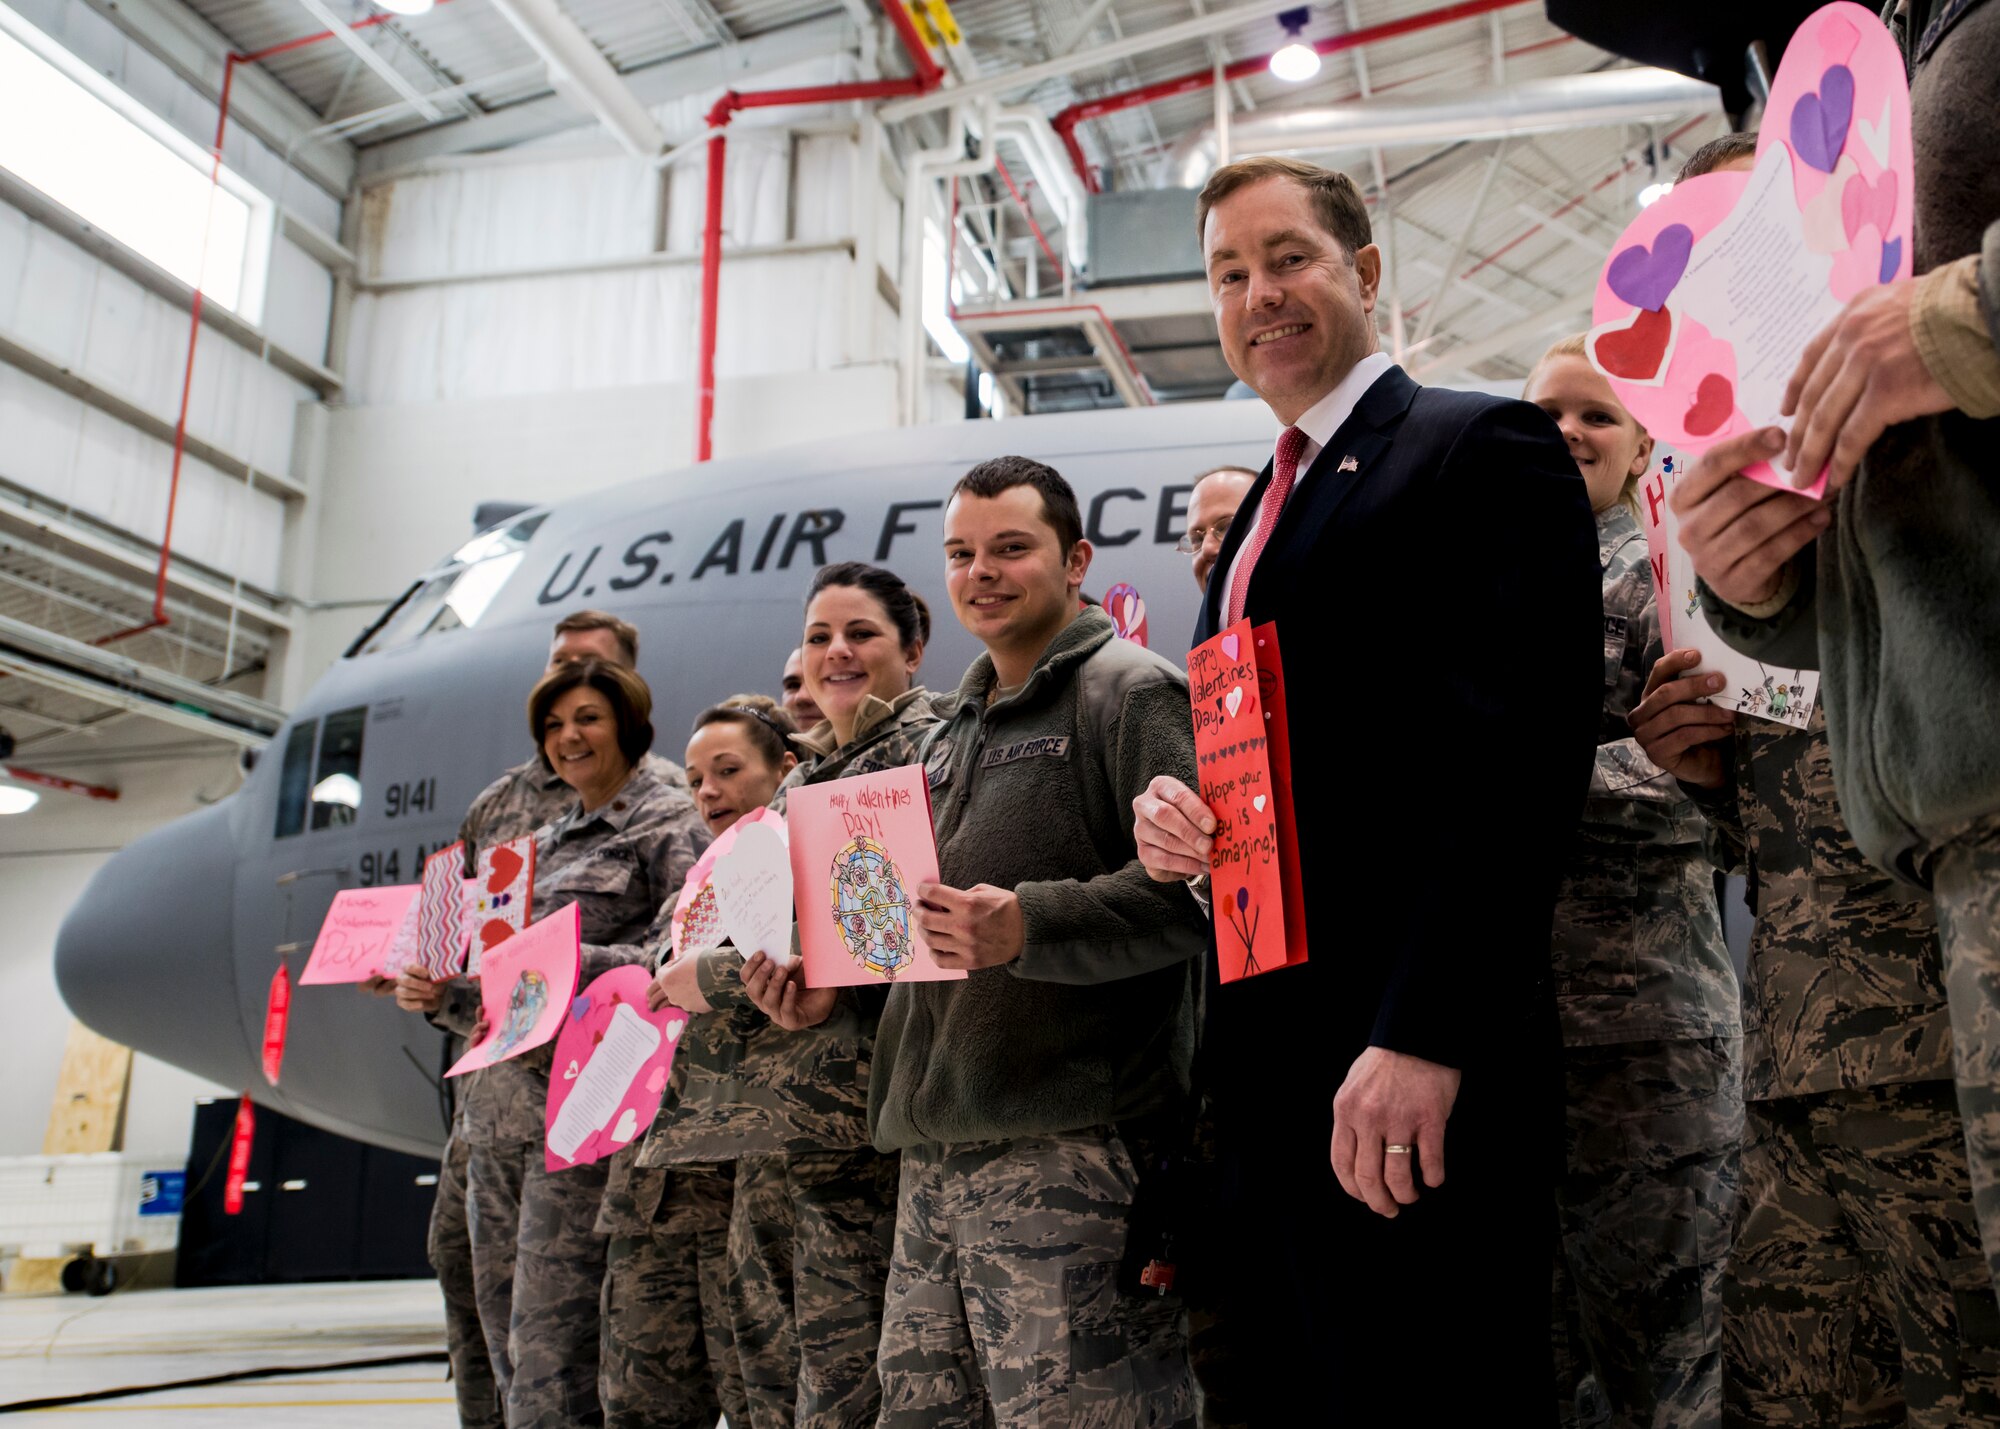 Erie County Legislator Edward A. Rath III, meets with members of the 914th and 107th Airlift Wings while he delivers hundreds of Valentine’s Day cards made by local school children during a presentation at the Niagara Falls Air Reserve Station February 7, 2014, Niagara Falls, NY. In the weeks leading up to Valentine’s Day, Legislator Rath visited the schools to personally collect the cards and thank the students for their participation. When meeting with the students, Legislator Rath encouraged them to honor veterans year round and to always thank a veteran or member of the military when they have a chance. (U.S. Air Force photo by Tech. Sgt. Joseph McKee)